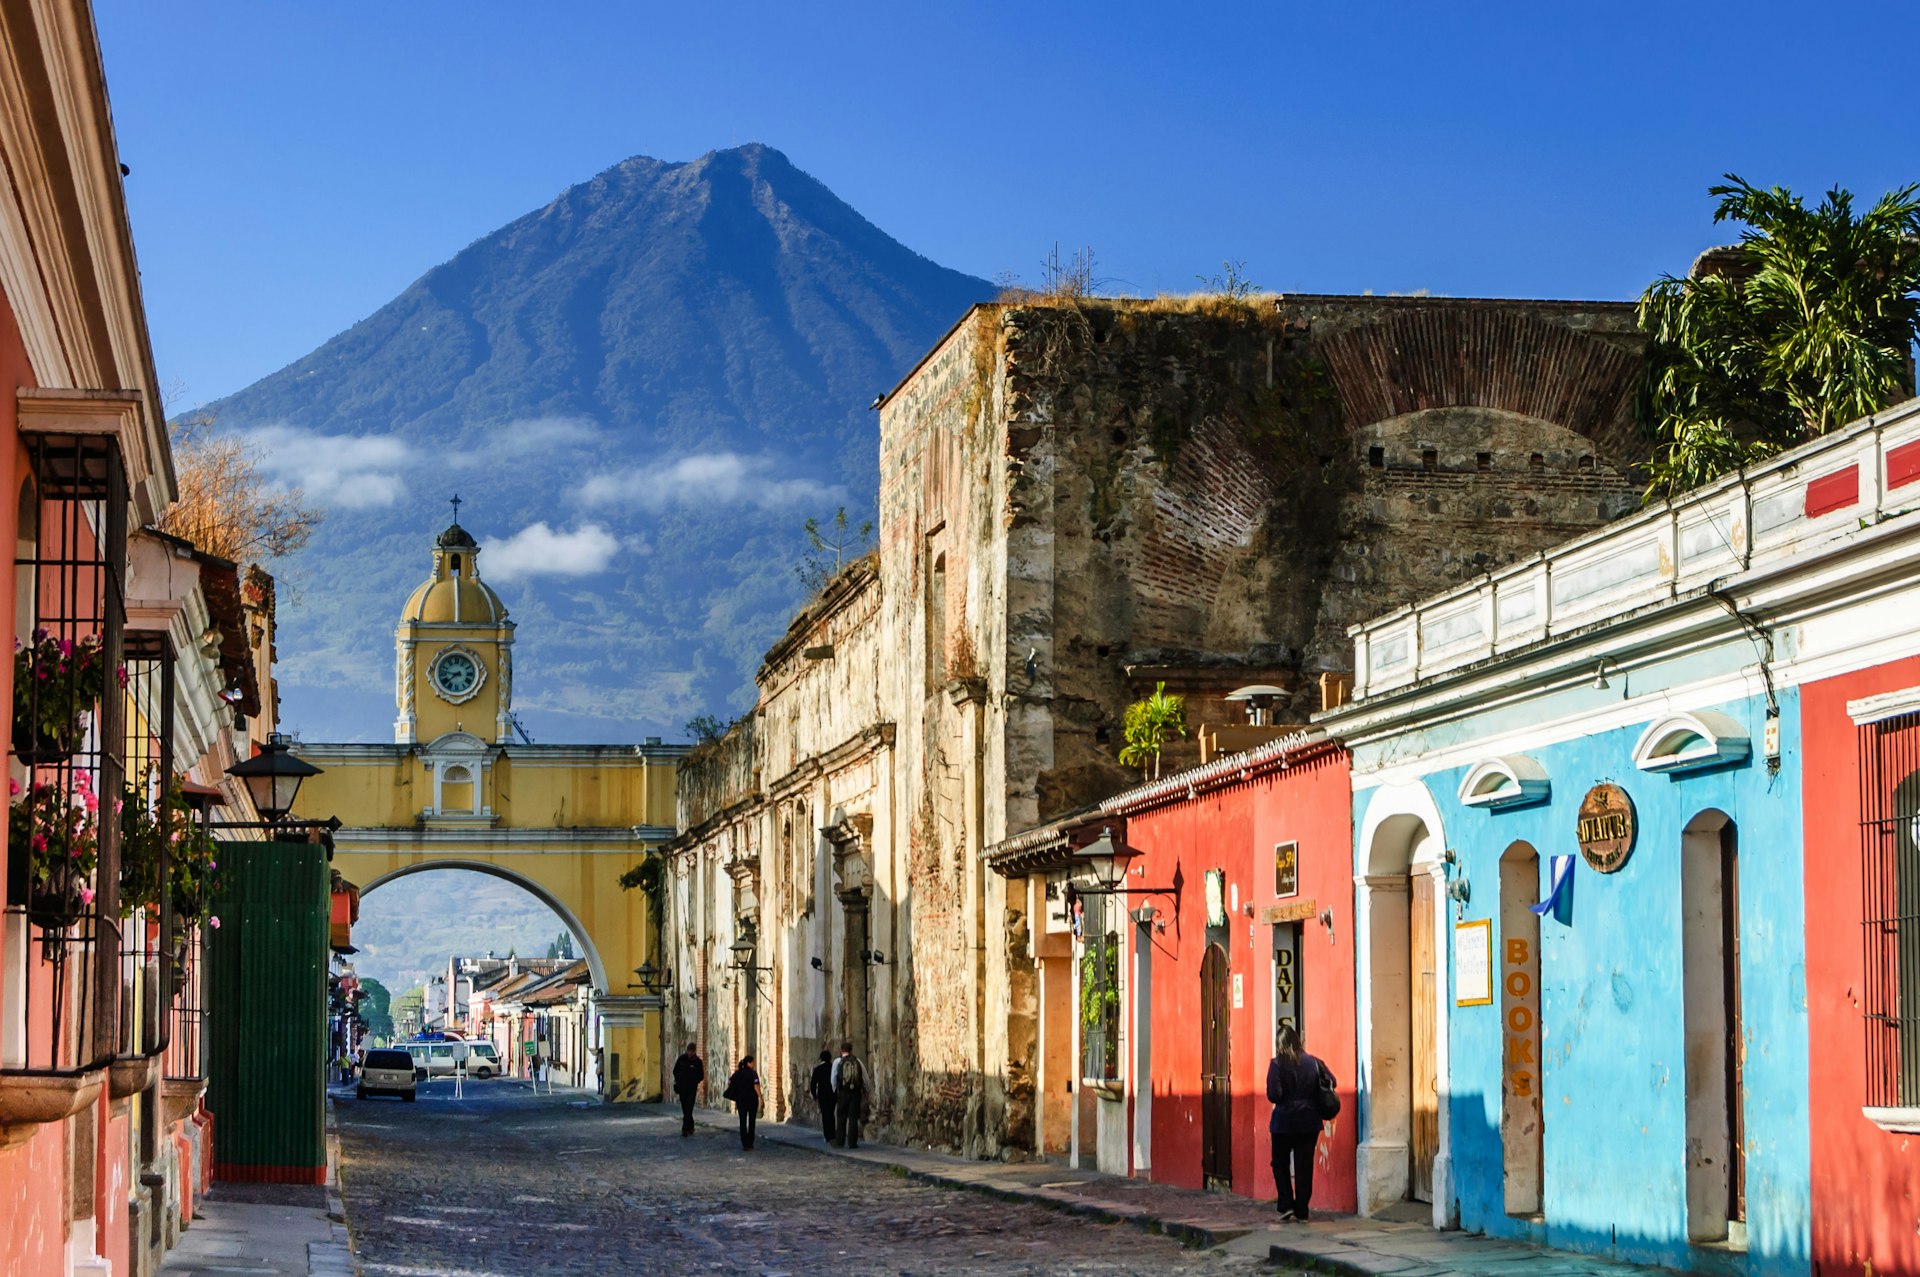 The Agua volcano rises above the cobbled streets of Antigua